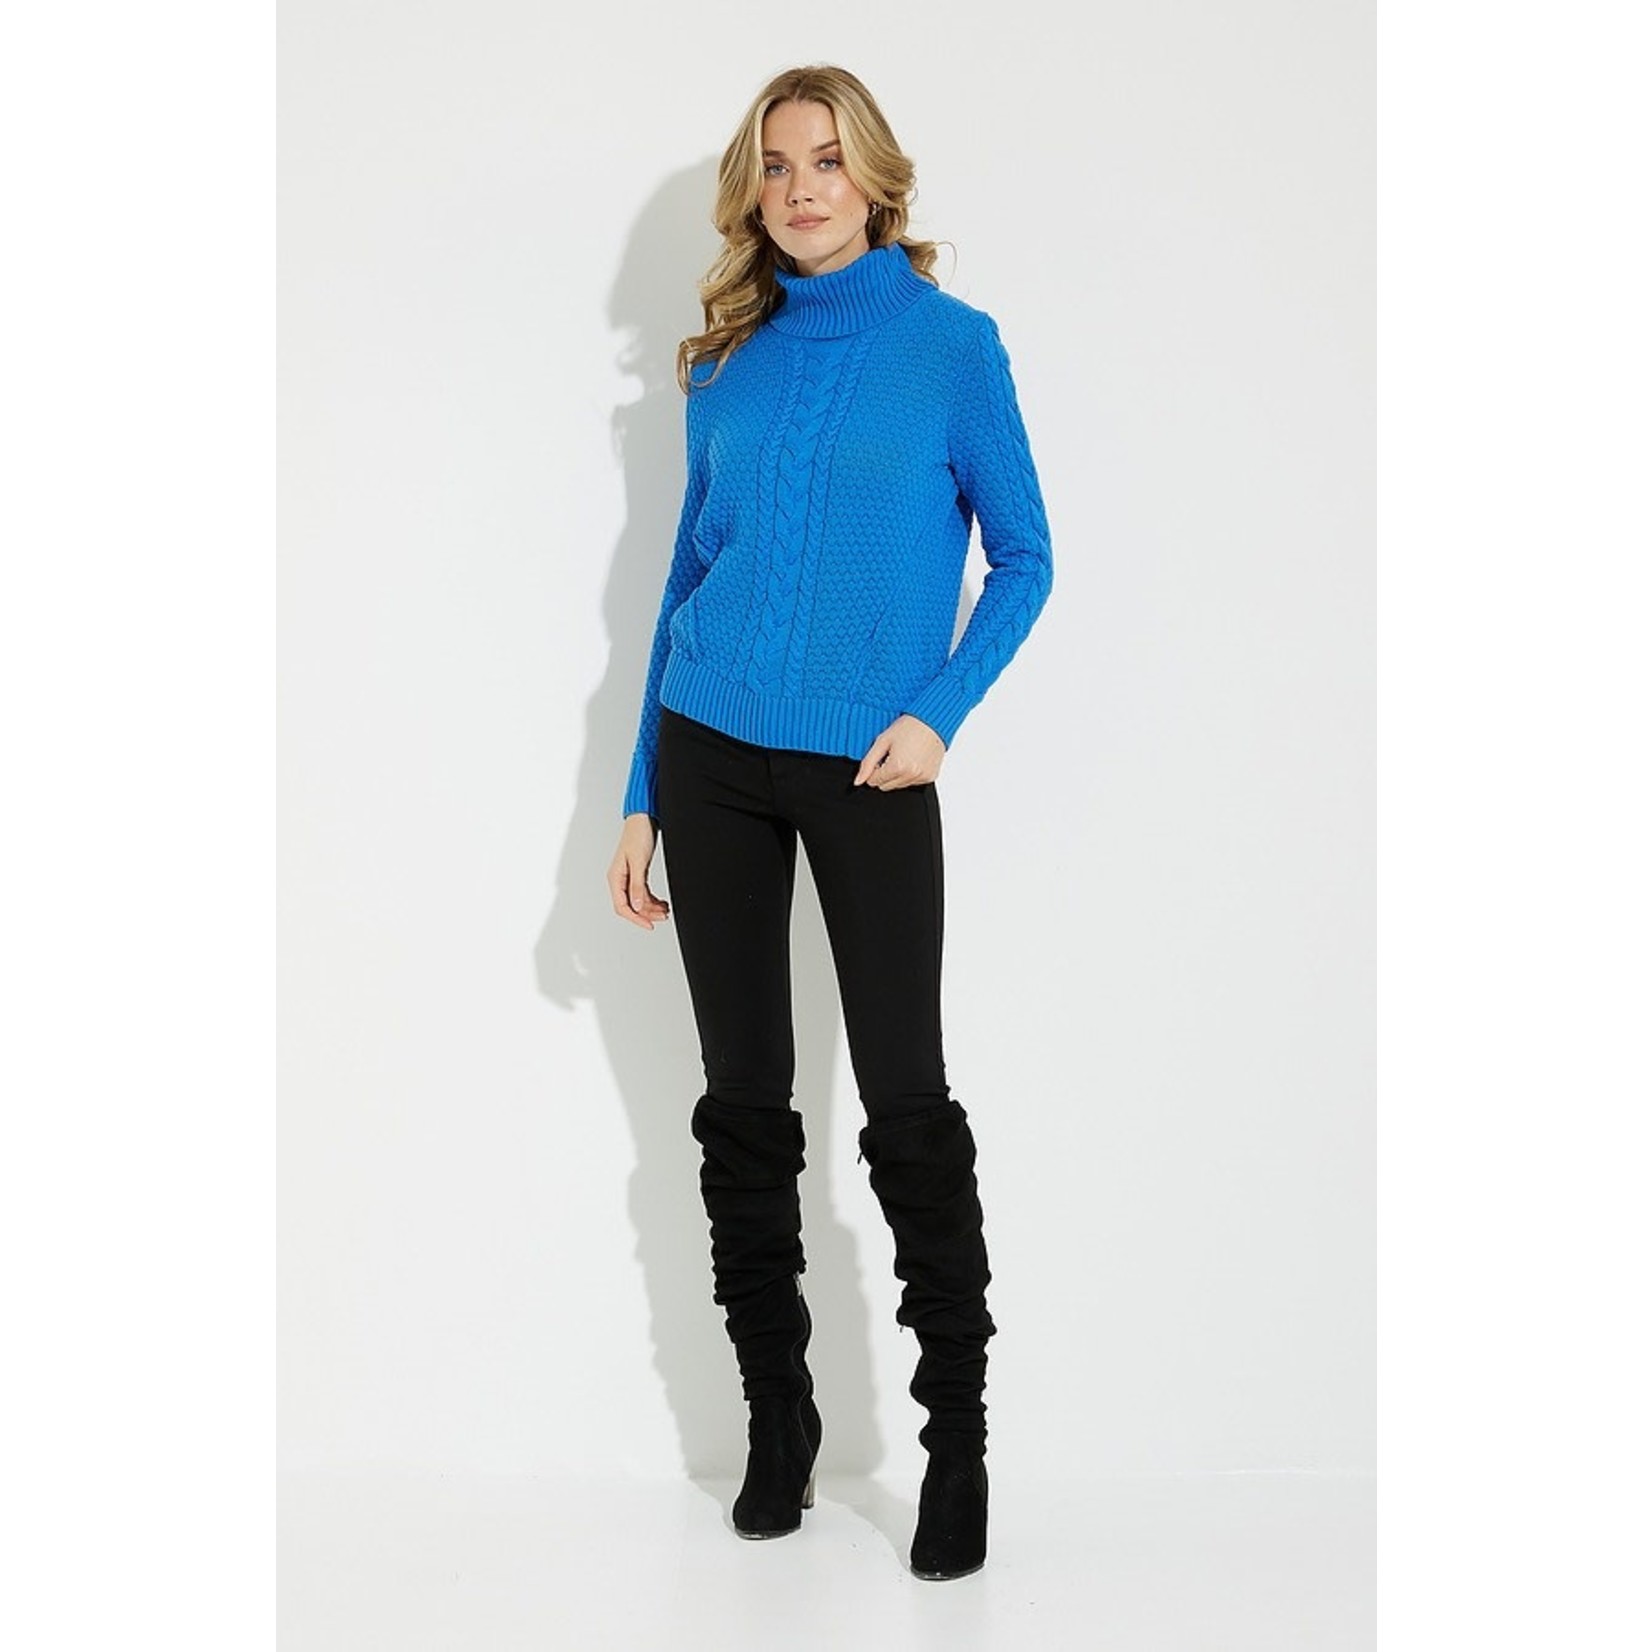 Alison Sheri Turtleneck Cable Knit Sweater in Blue